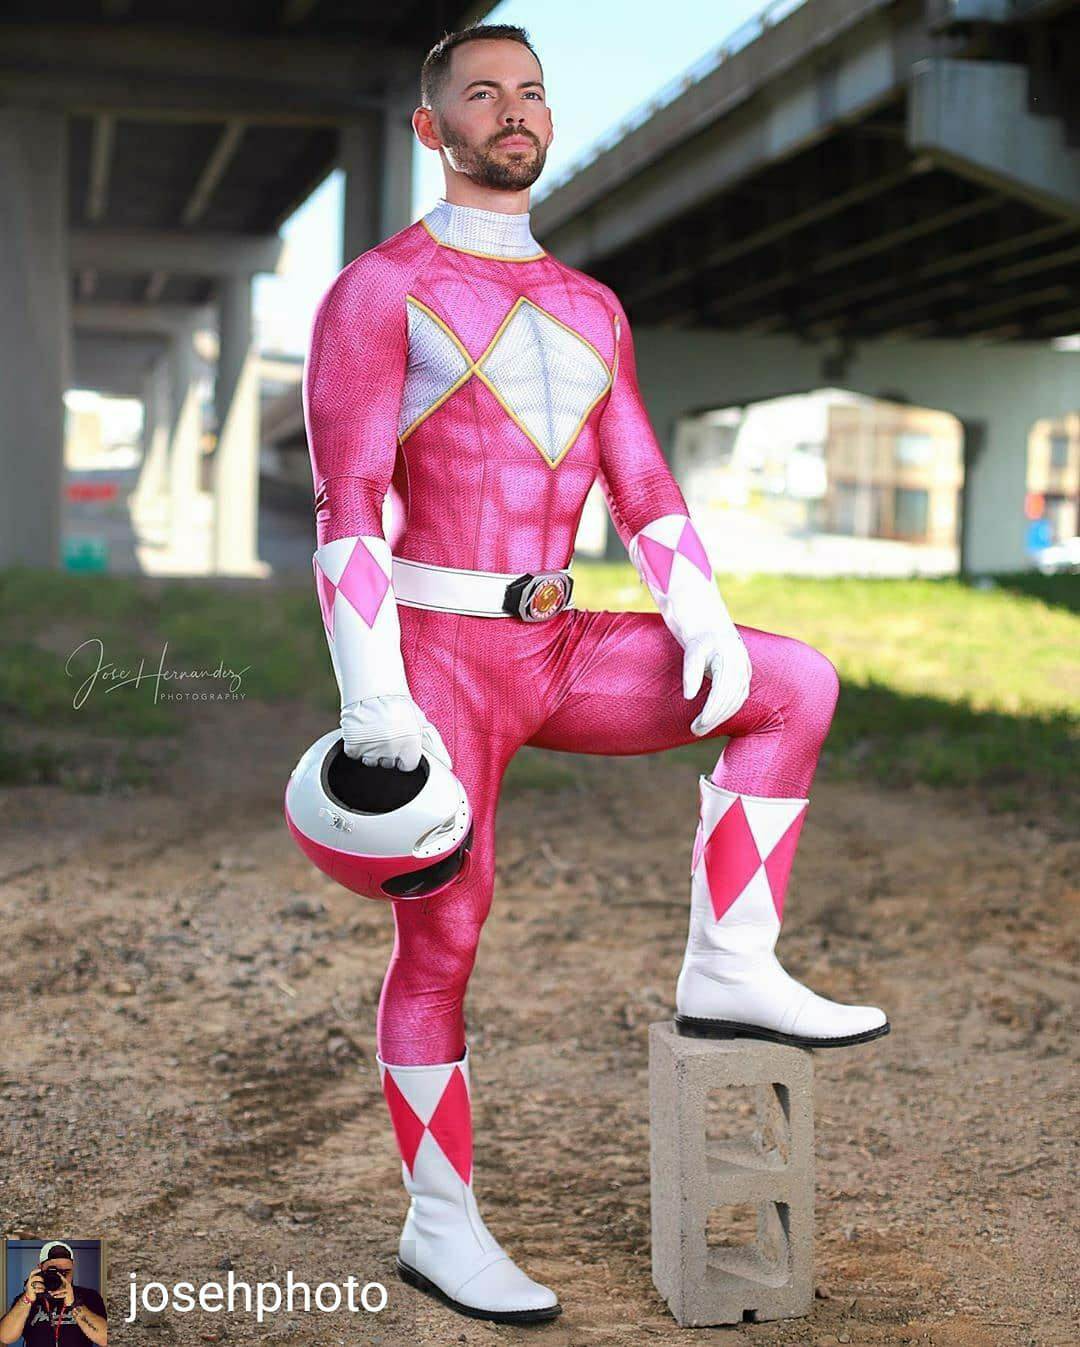 aviv kohen recommends Pictures Of The Pink Power Ranger